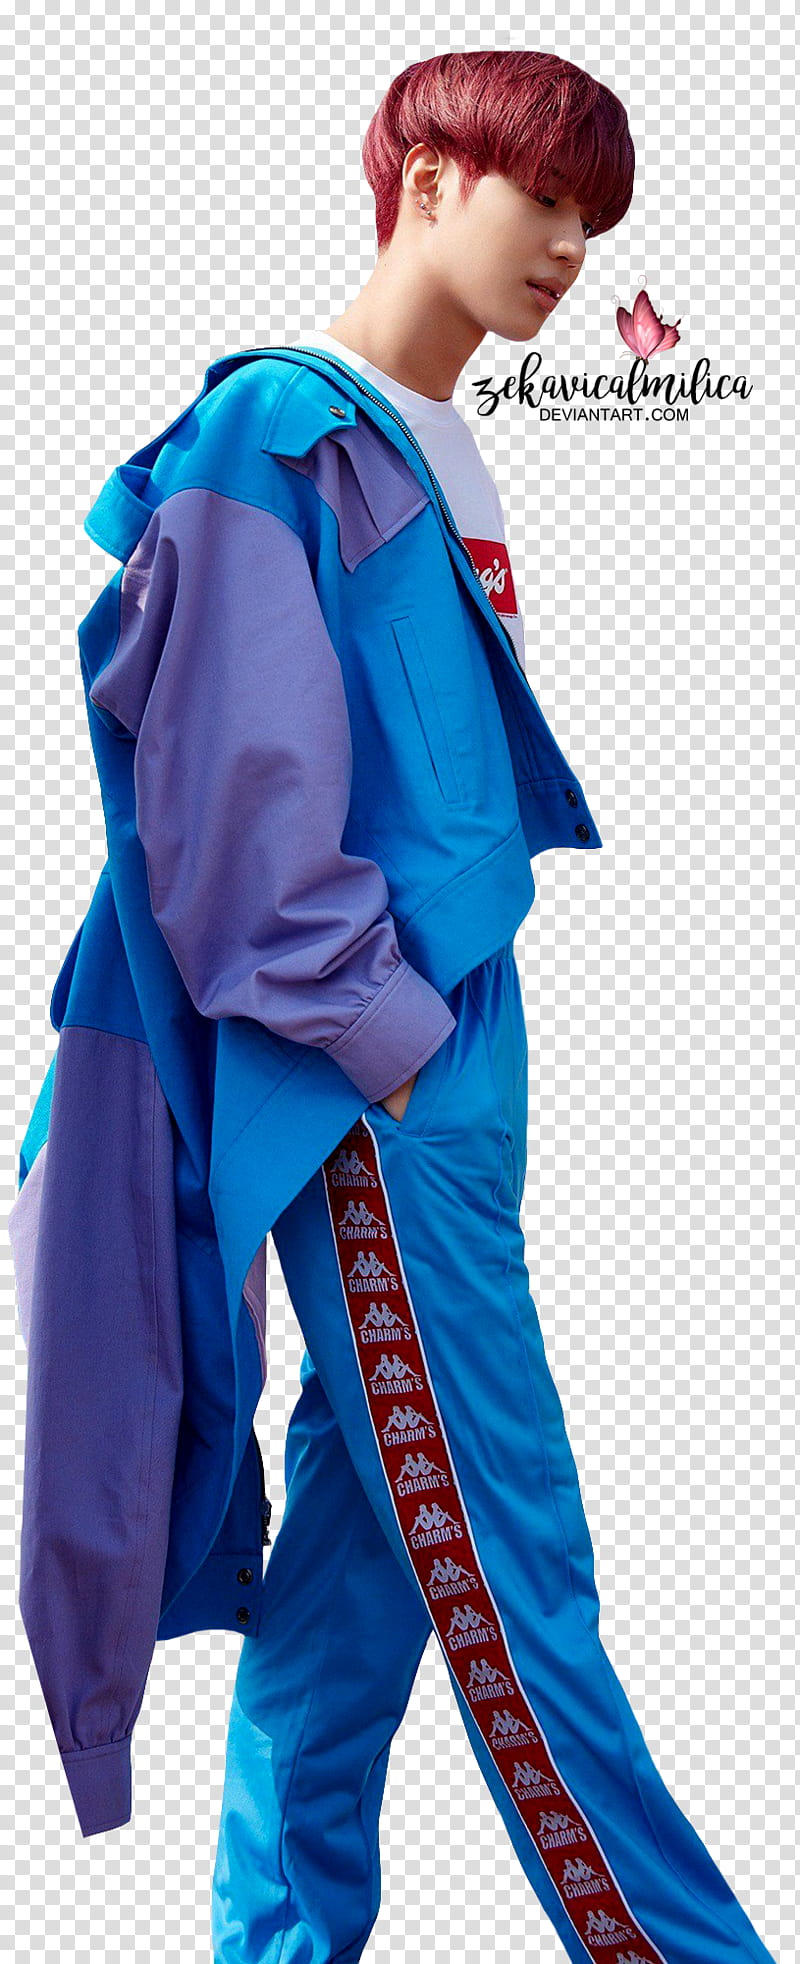 SHINee Taemin The Story Of Light, man wearing blue and red zip-up jacket and pants transparent background PNG clipart